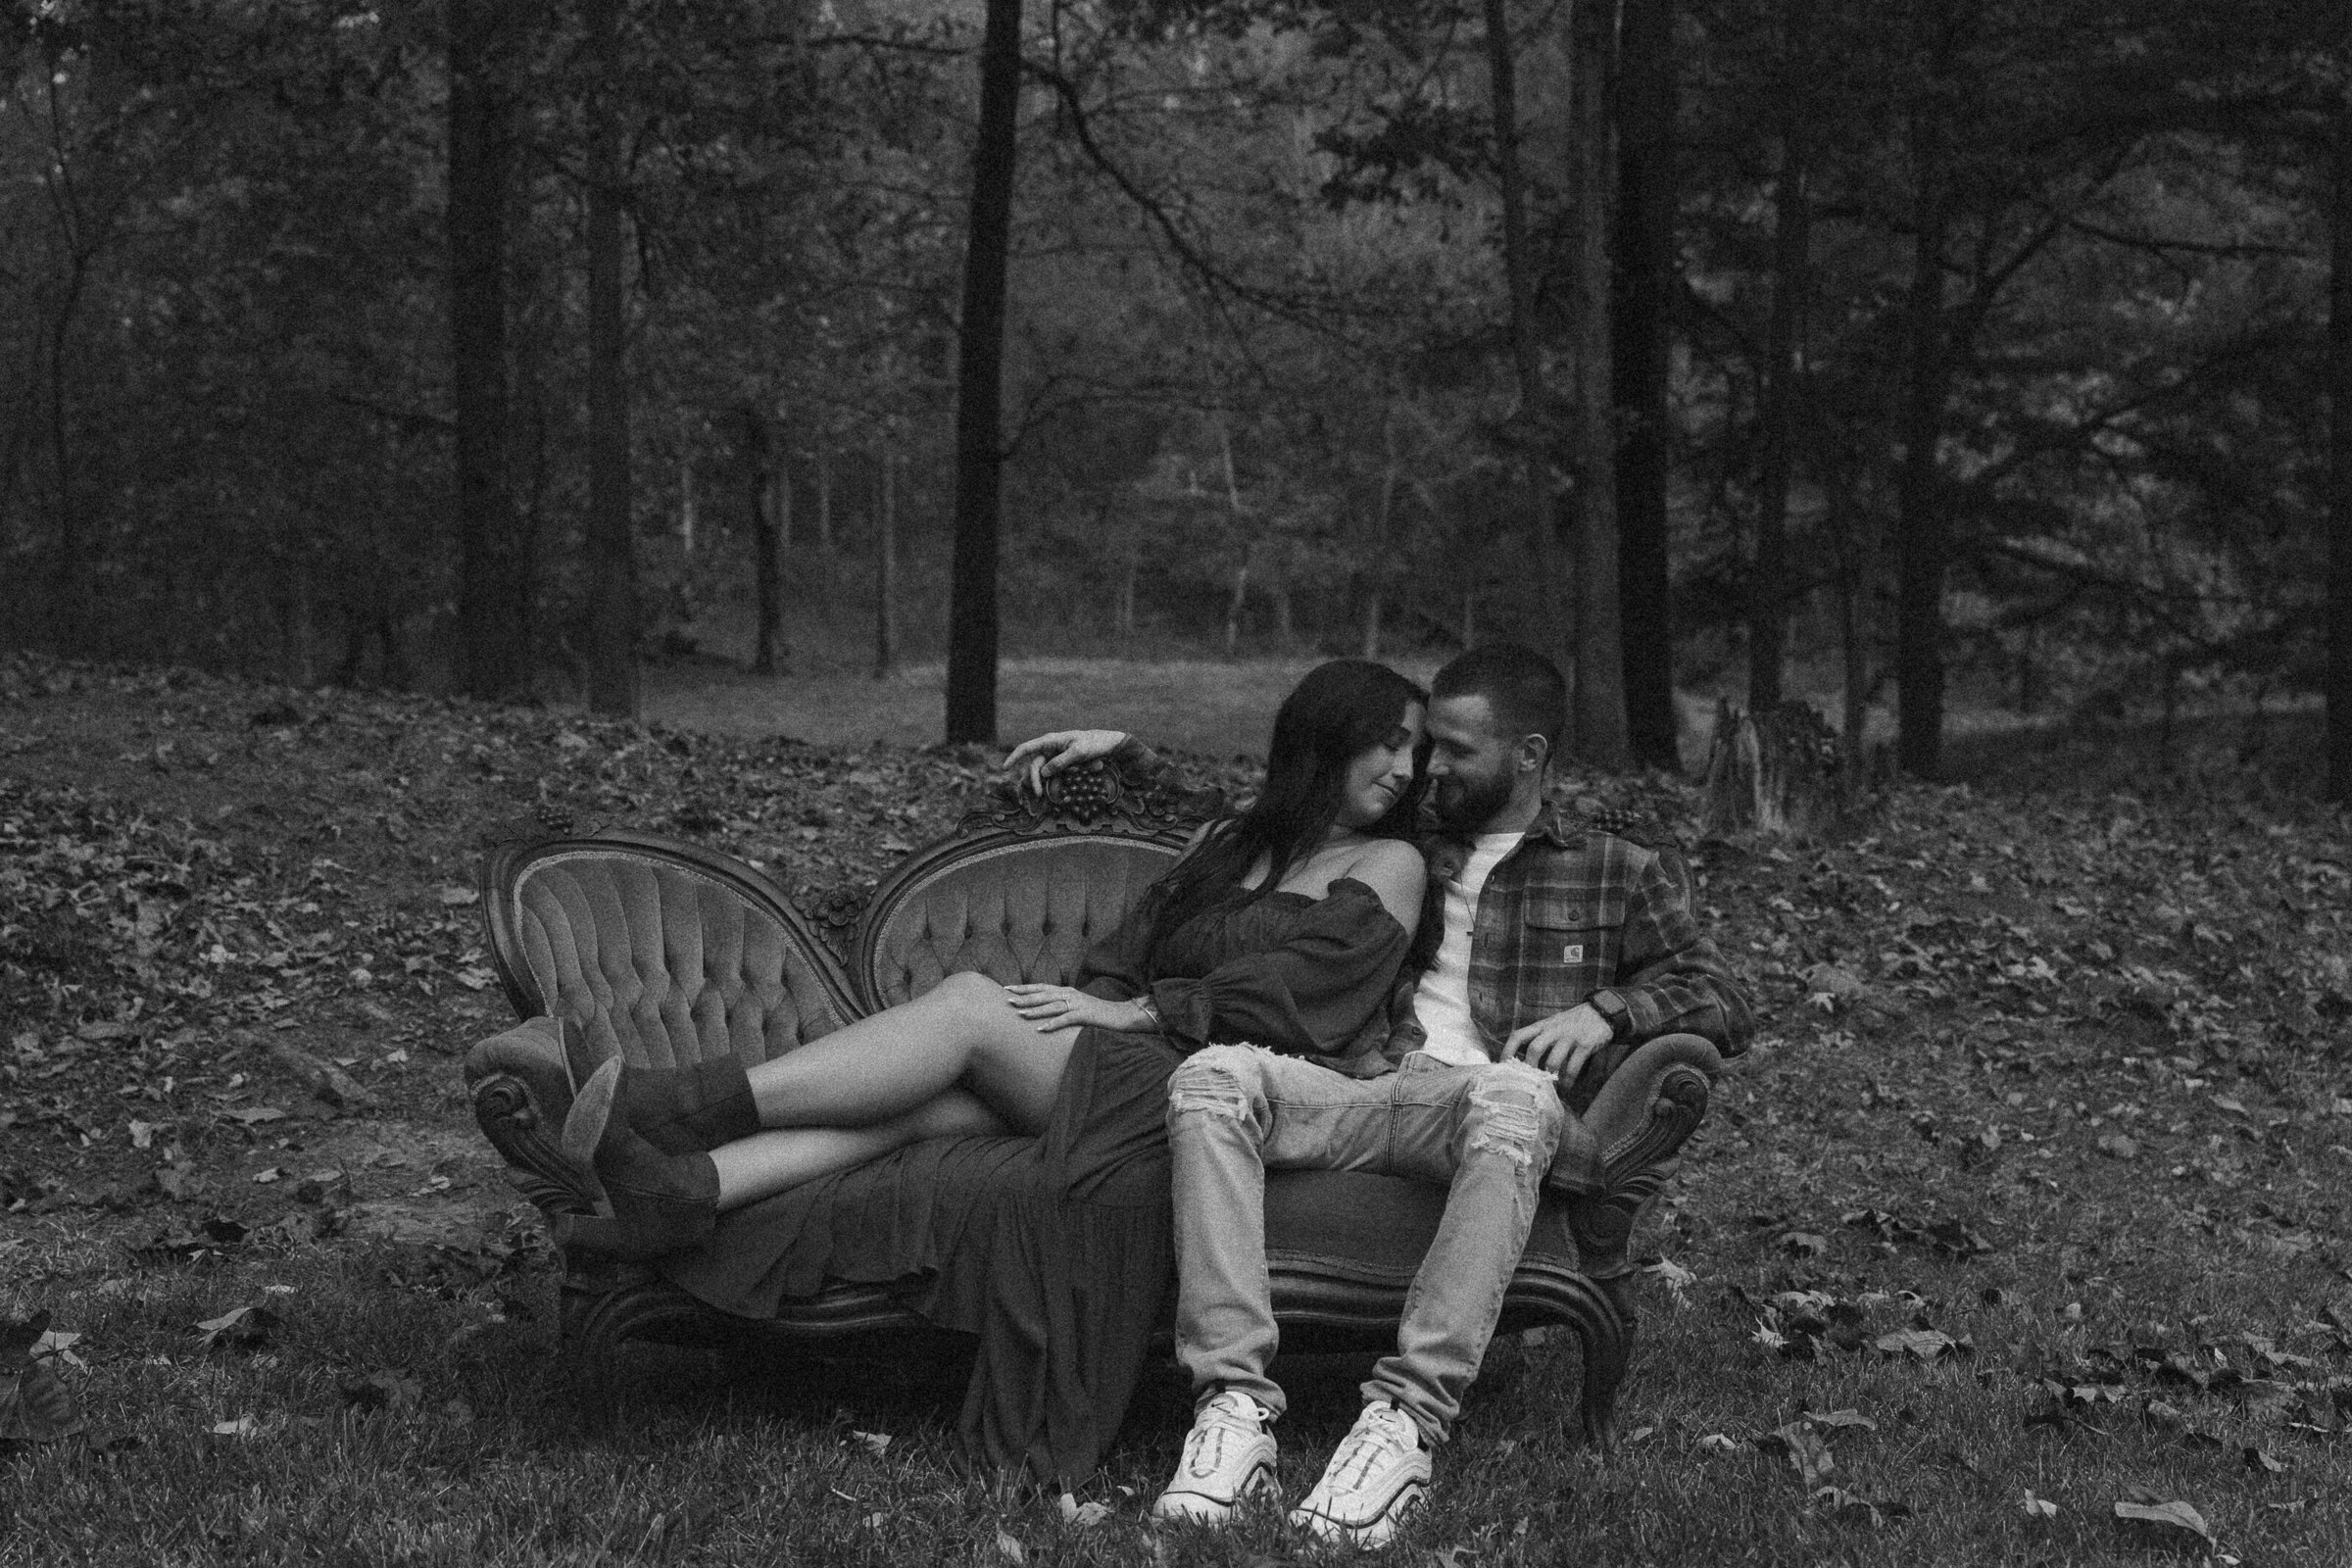 Couple embracing on a vintage sofa outdoors, candid black and white photo.